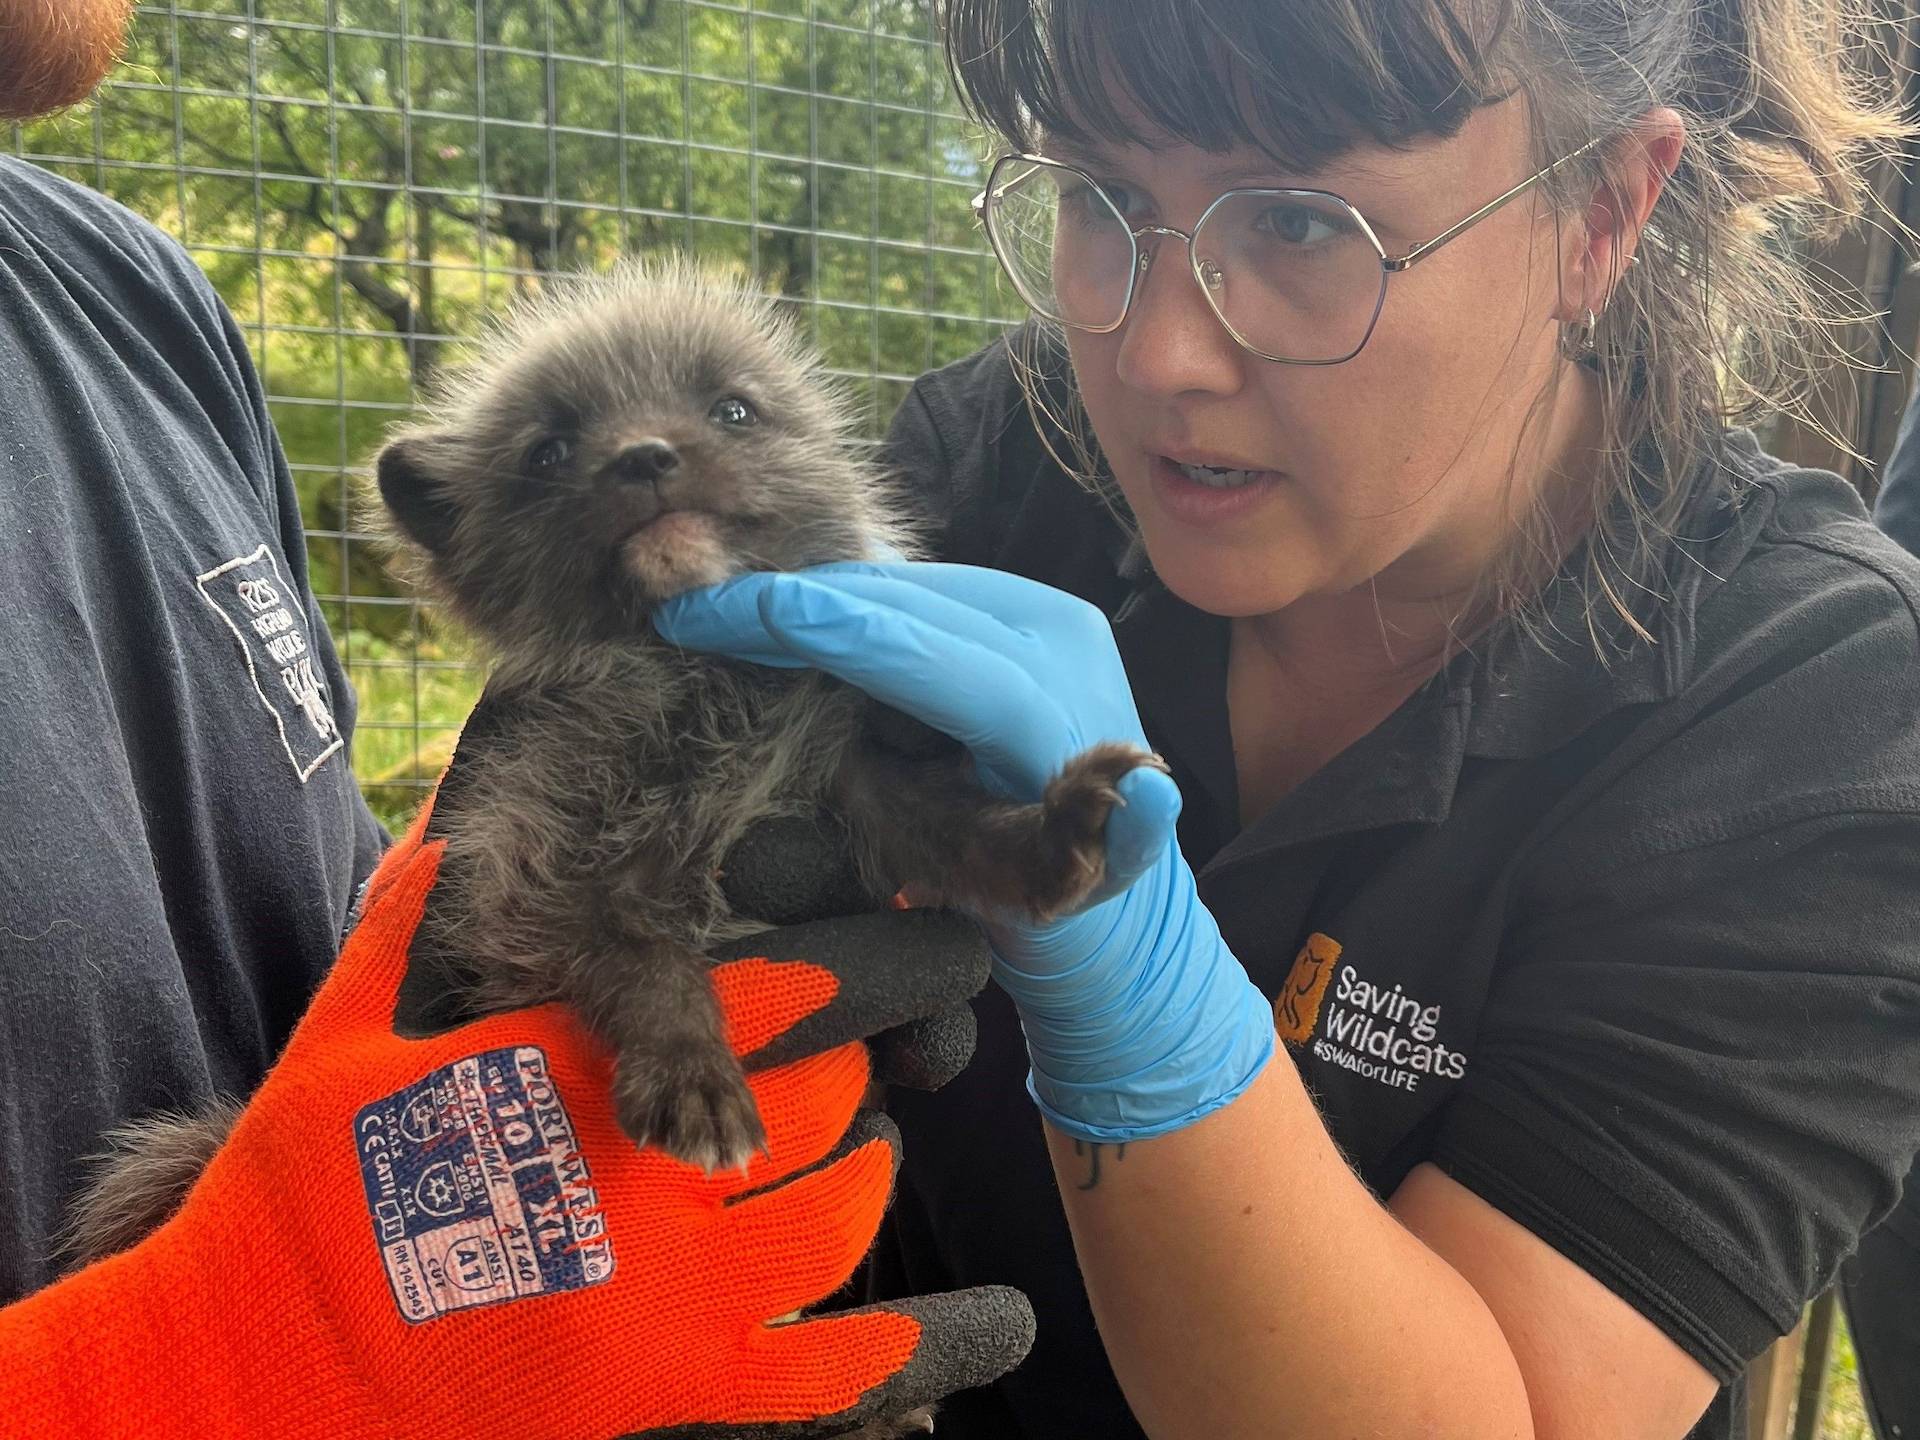 Vet Rebecca Amos doing health check of arctic fox pup held by keeper wearing orange gloves

Image: 2023